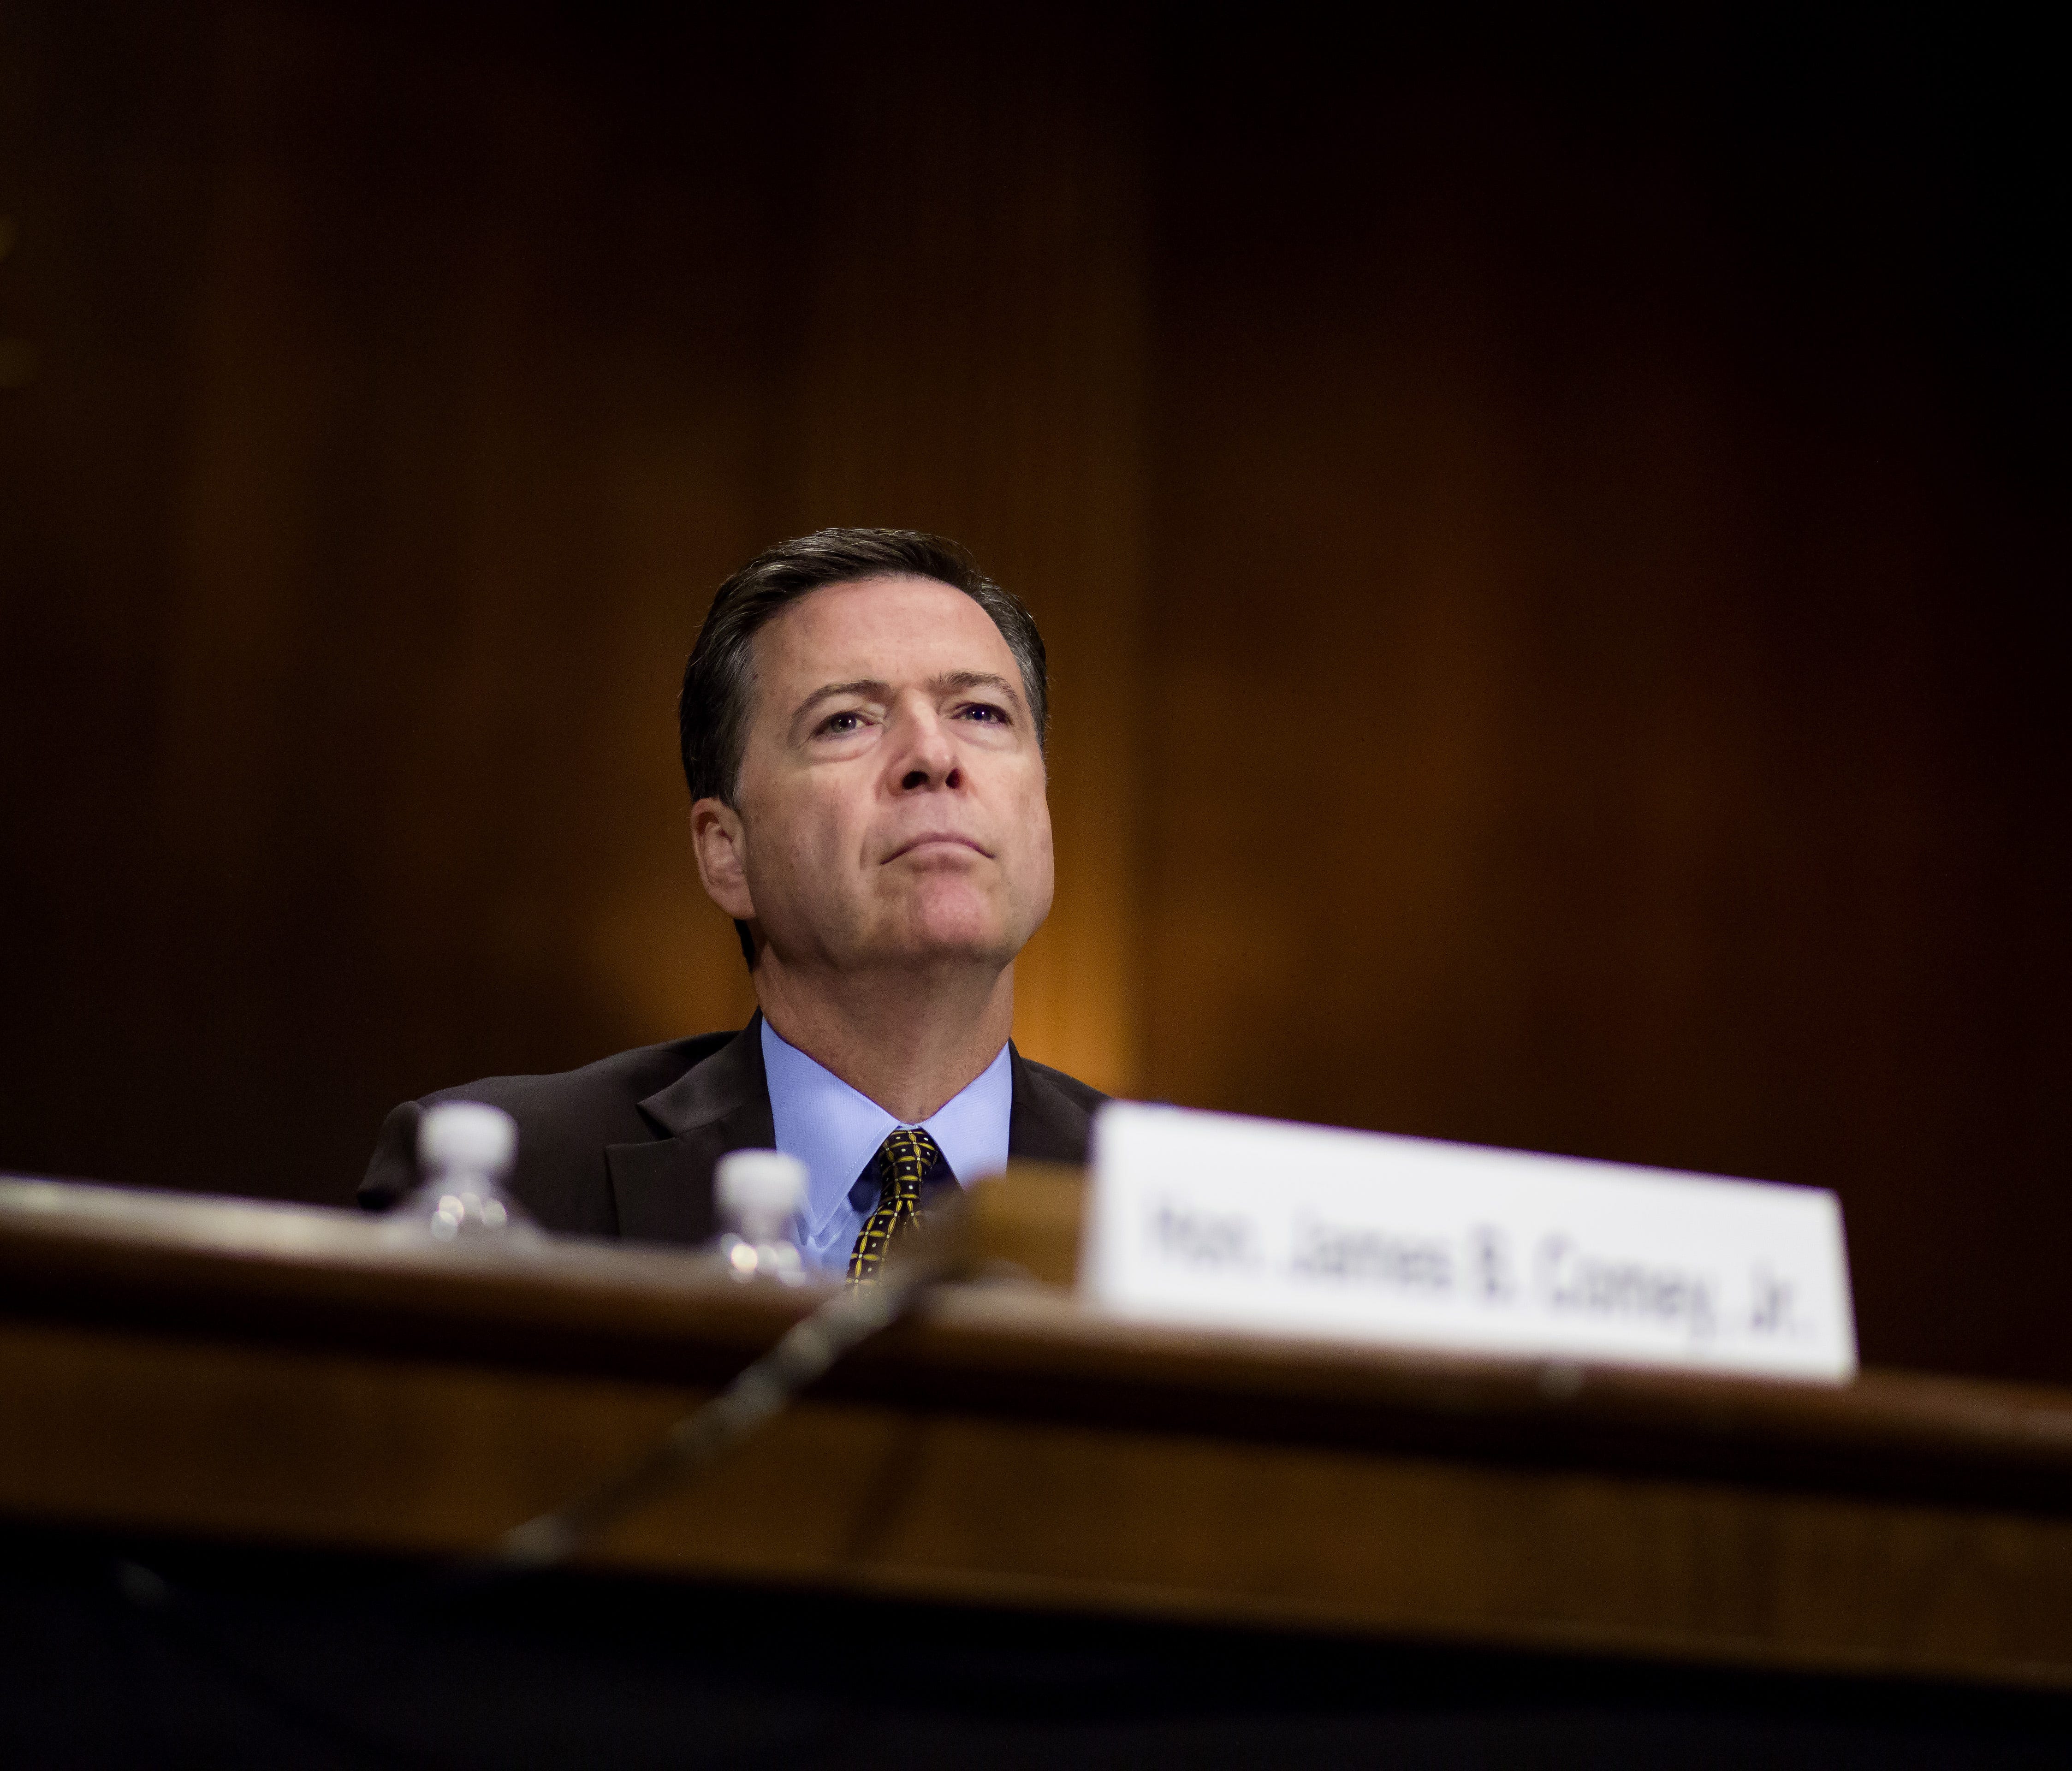 James Comey testifies before the Senate Judiciary Committee on Capitol Hill on May 3, 2017.